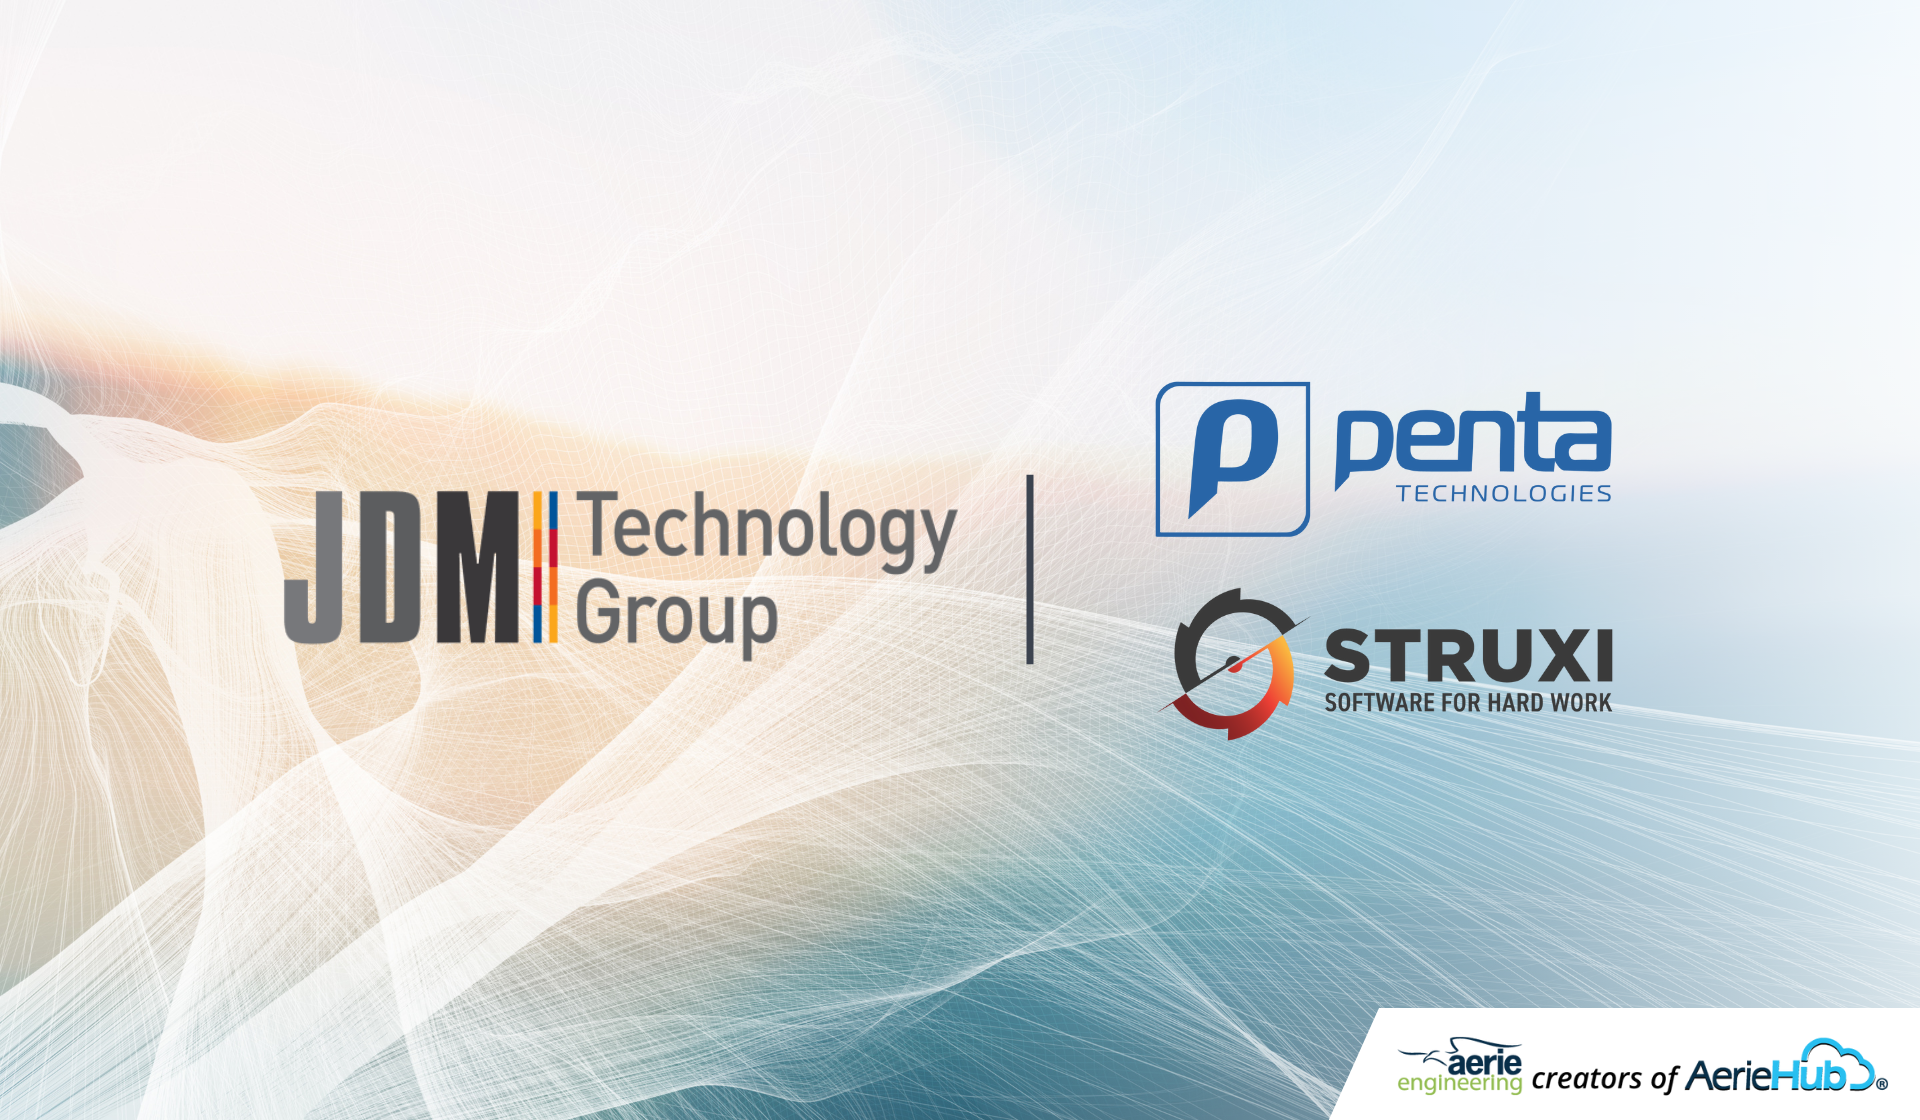 JDM Technology Group acquires Penta Technologies and STRUXI